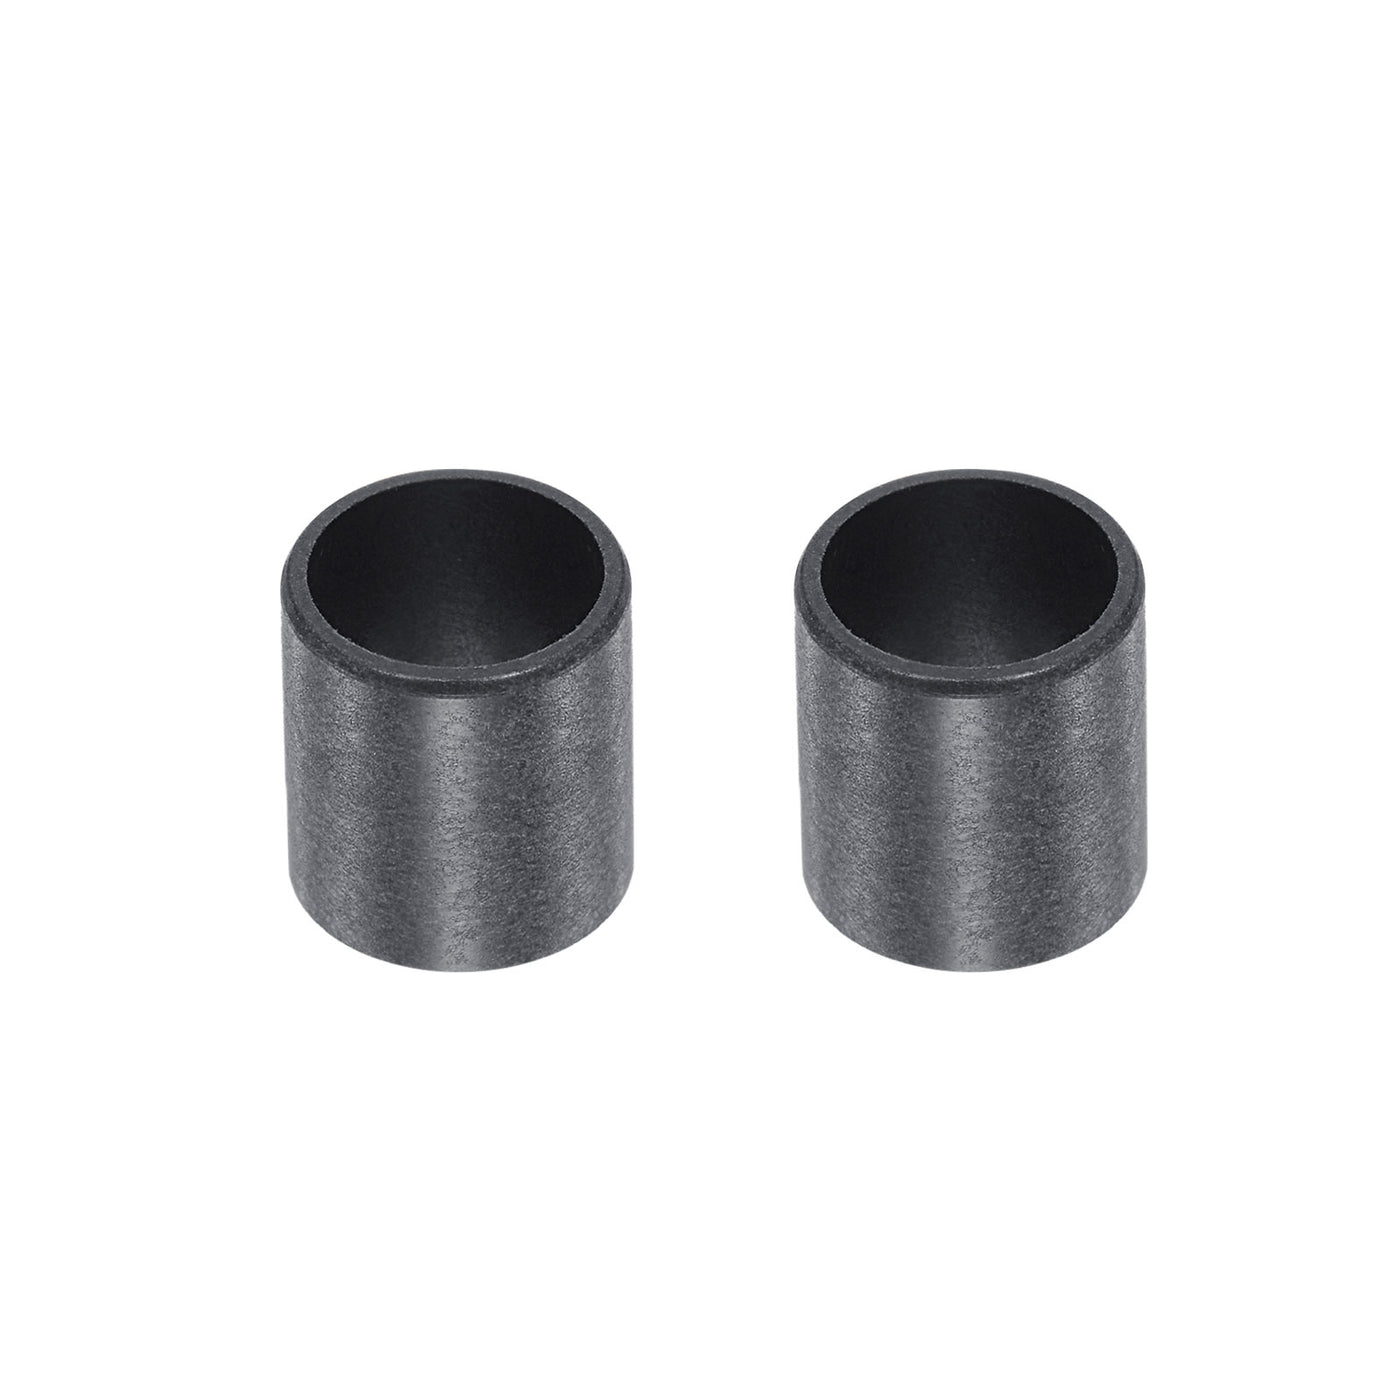 uxcell Uxcell Sleeve Bearings 10mmx12mmx12mm POM Wrapped Oilless Bushings Black 2pcs